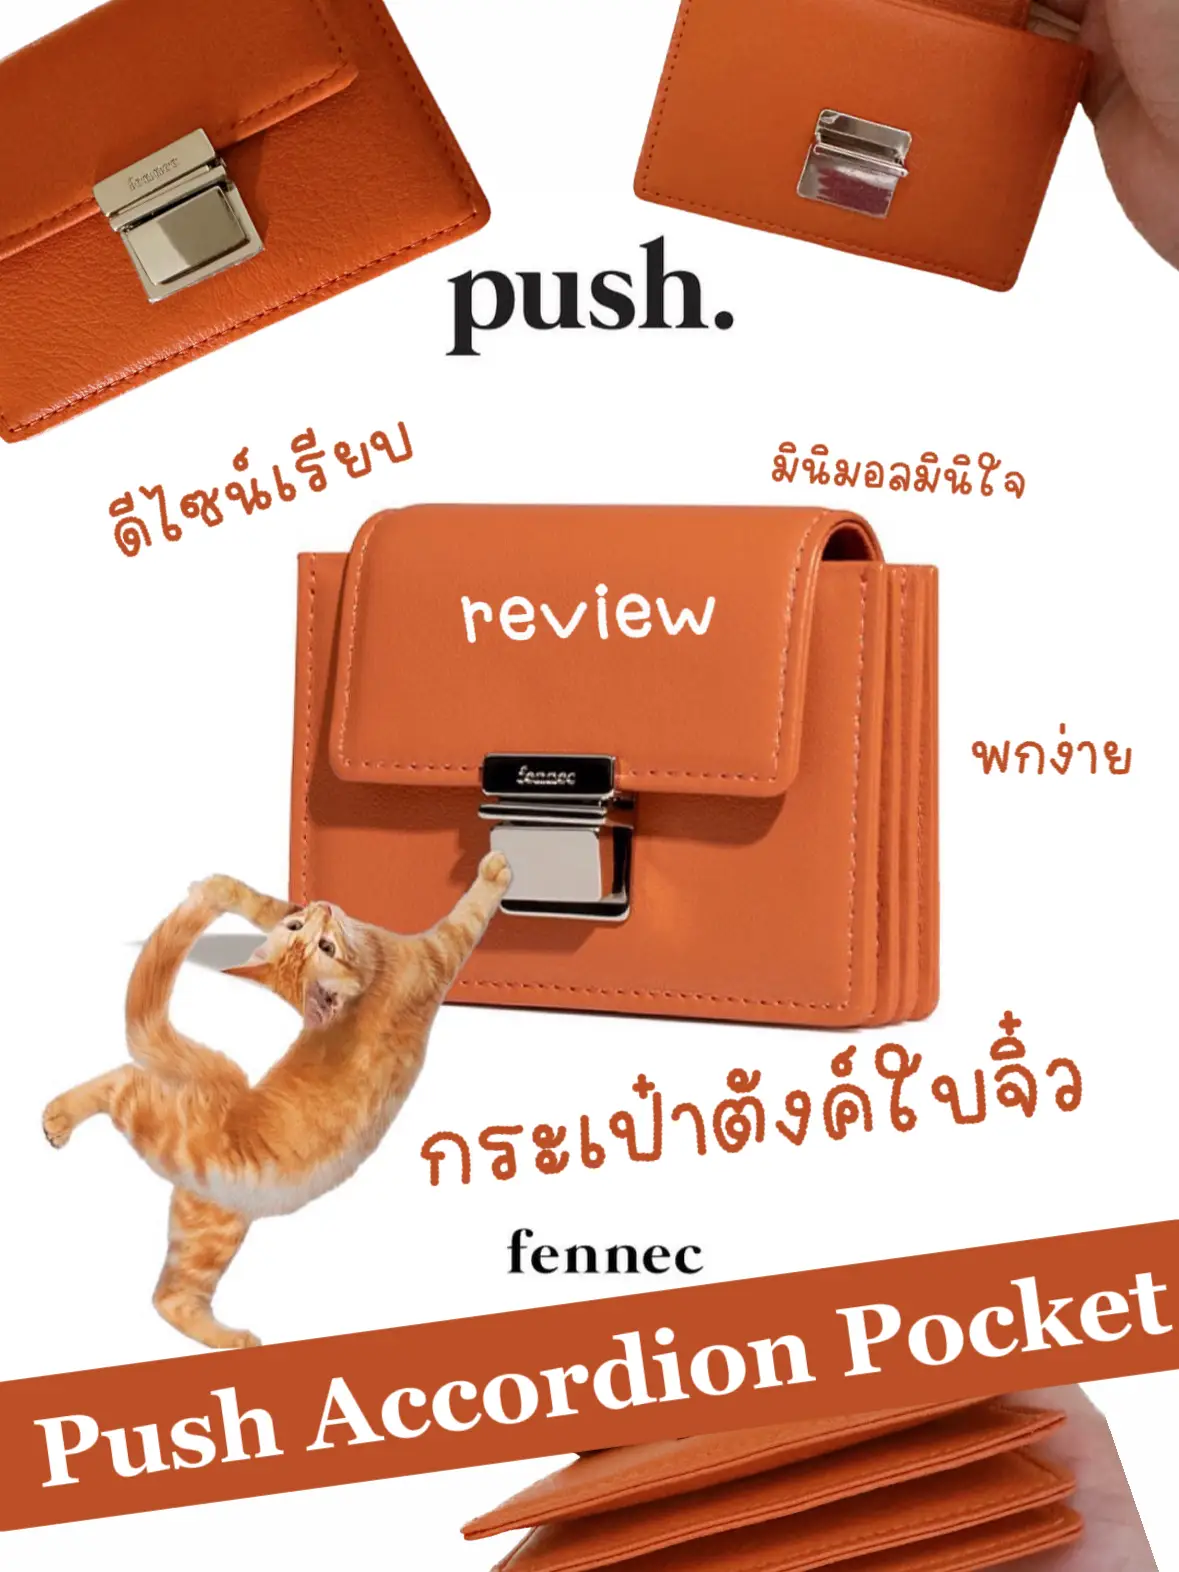 FENNEC Push Accordion Pocket Plus Tamutami Review, Gallery posted by tomo